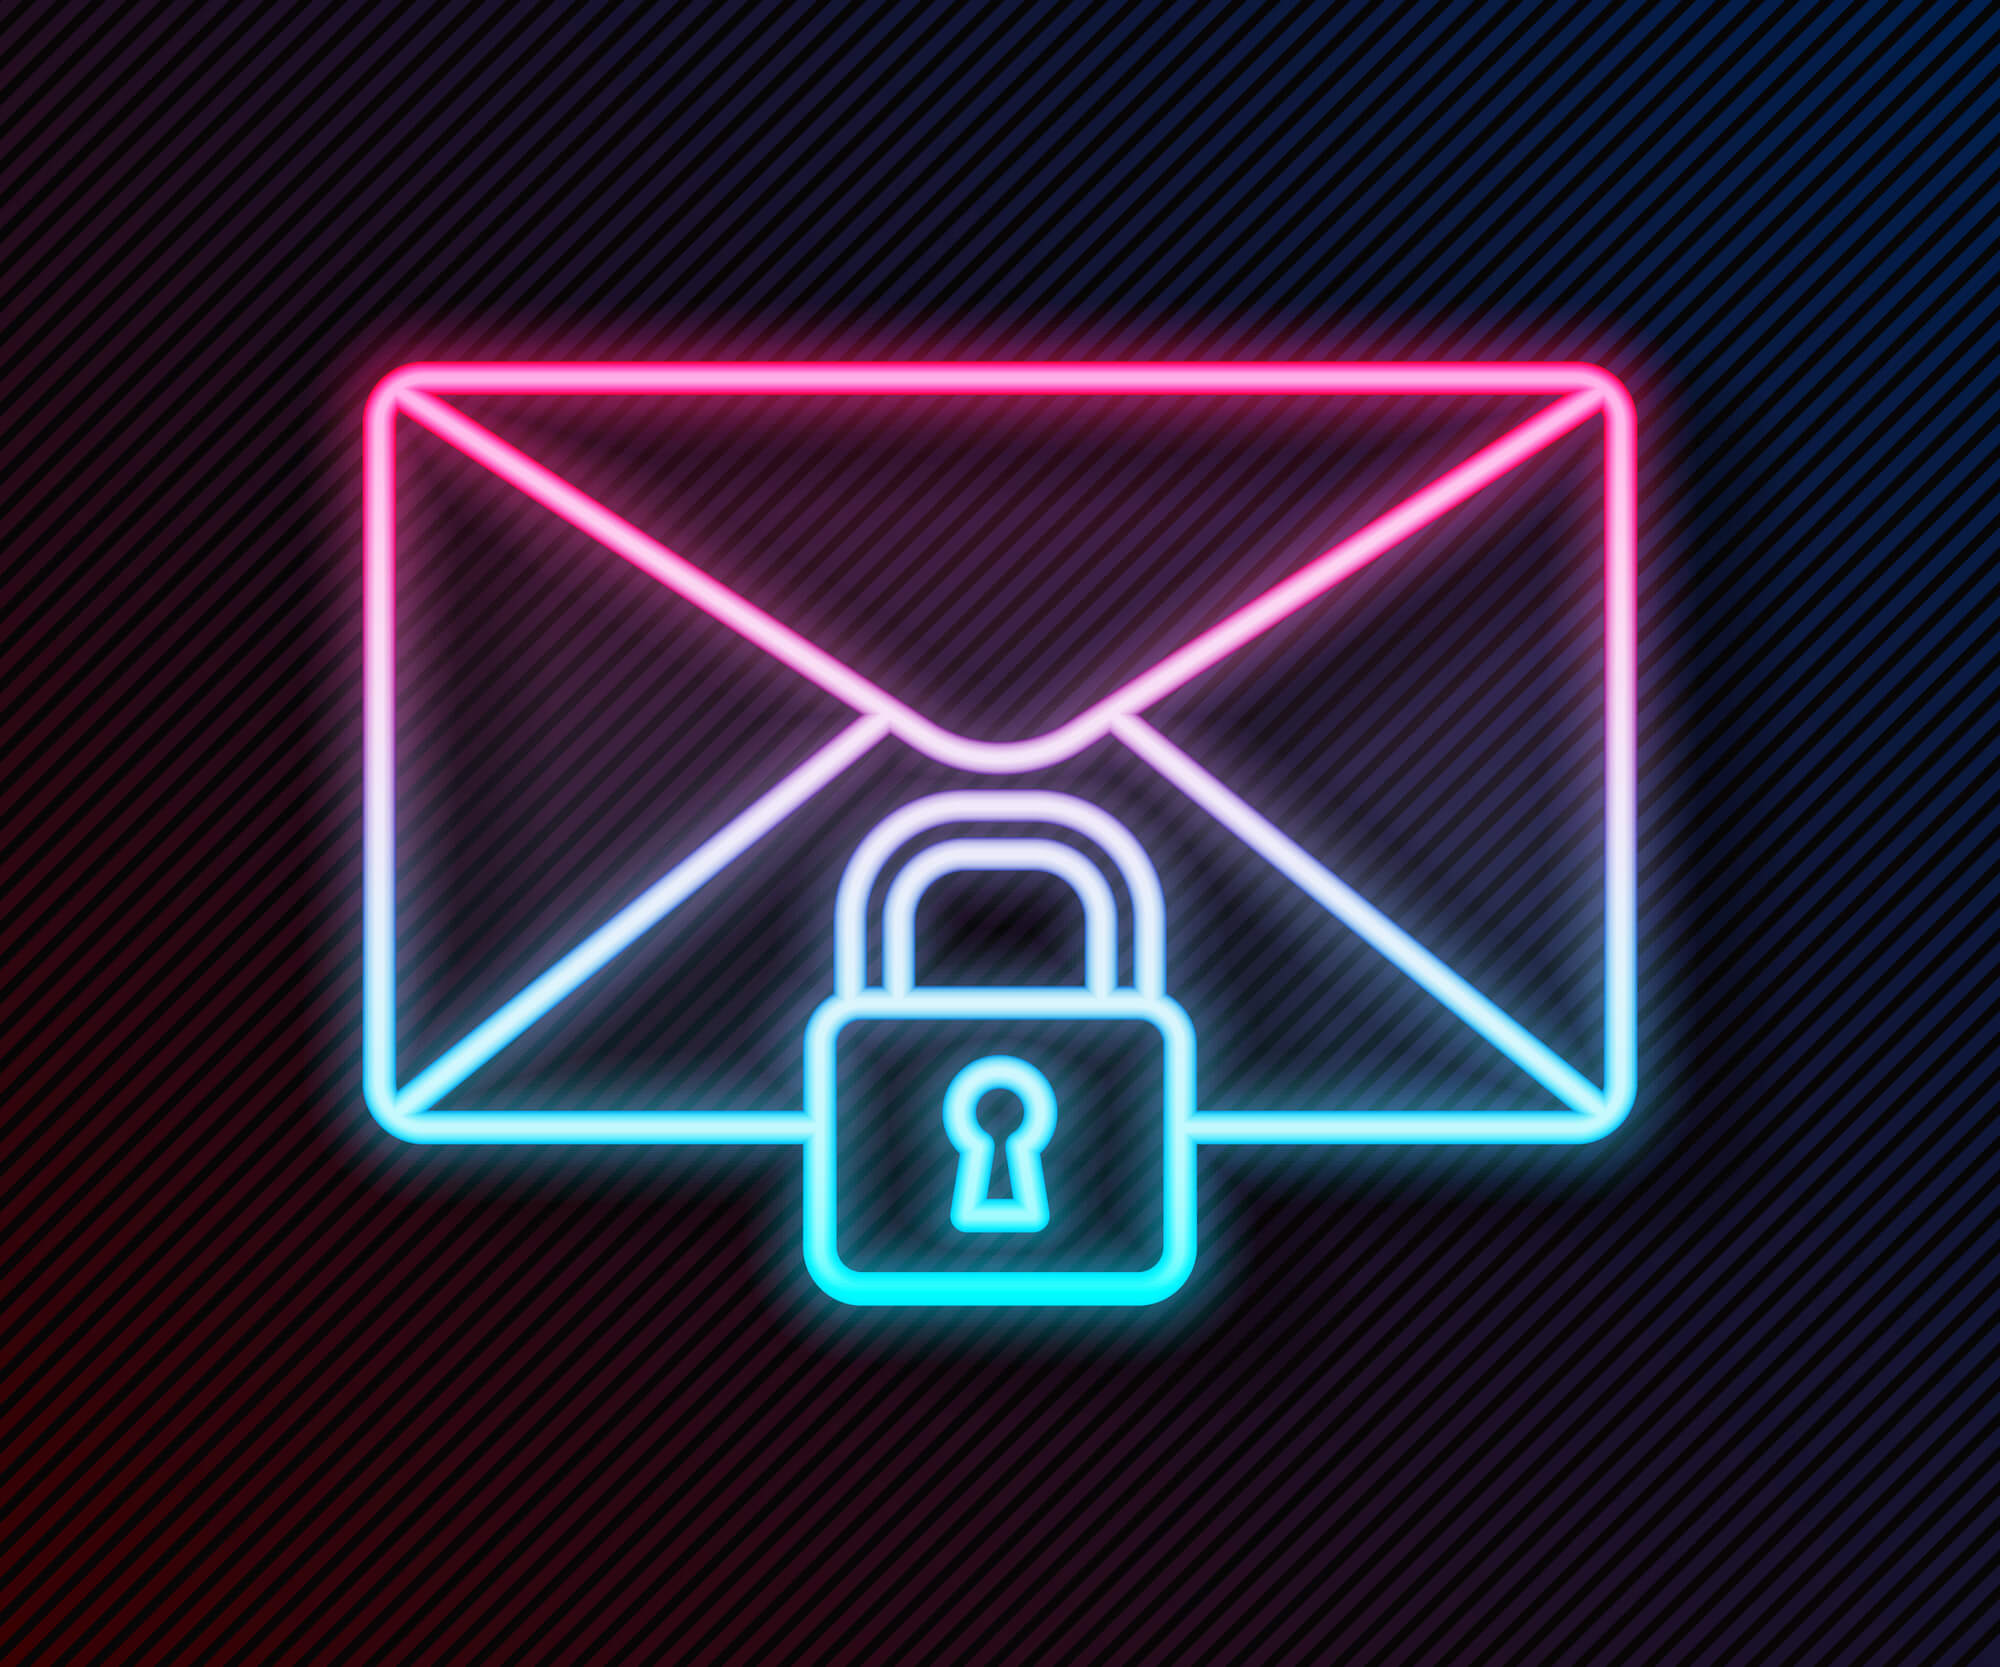 Encrypted email